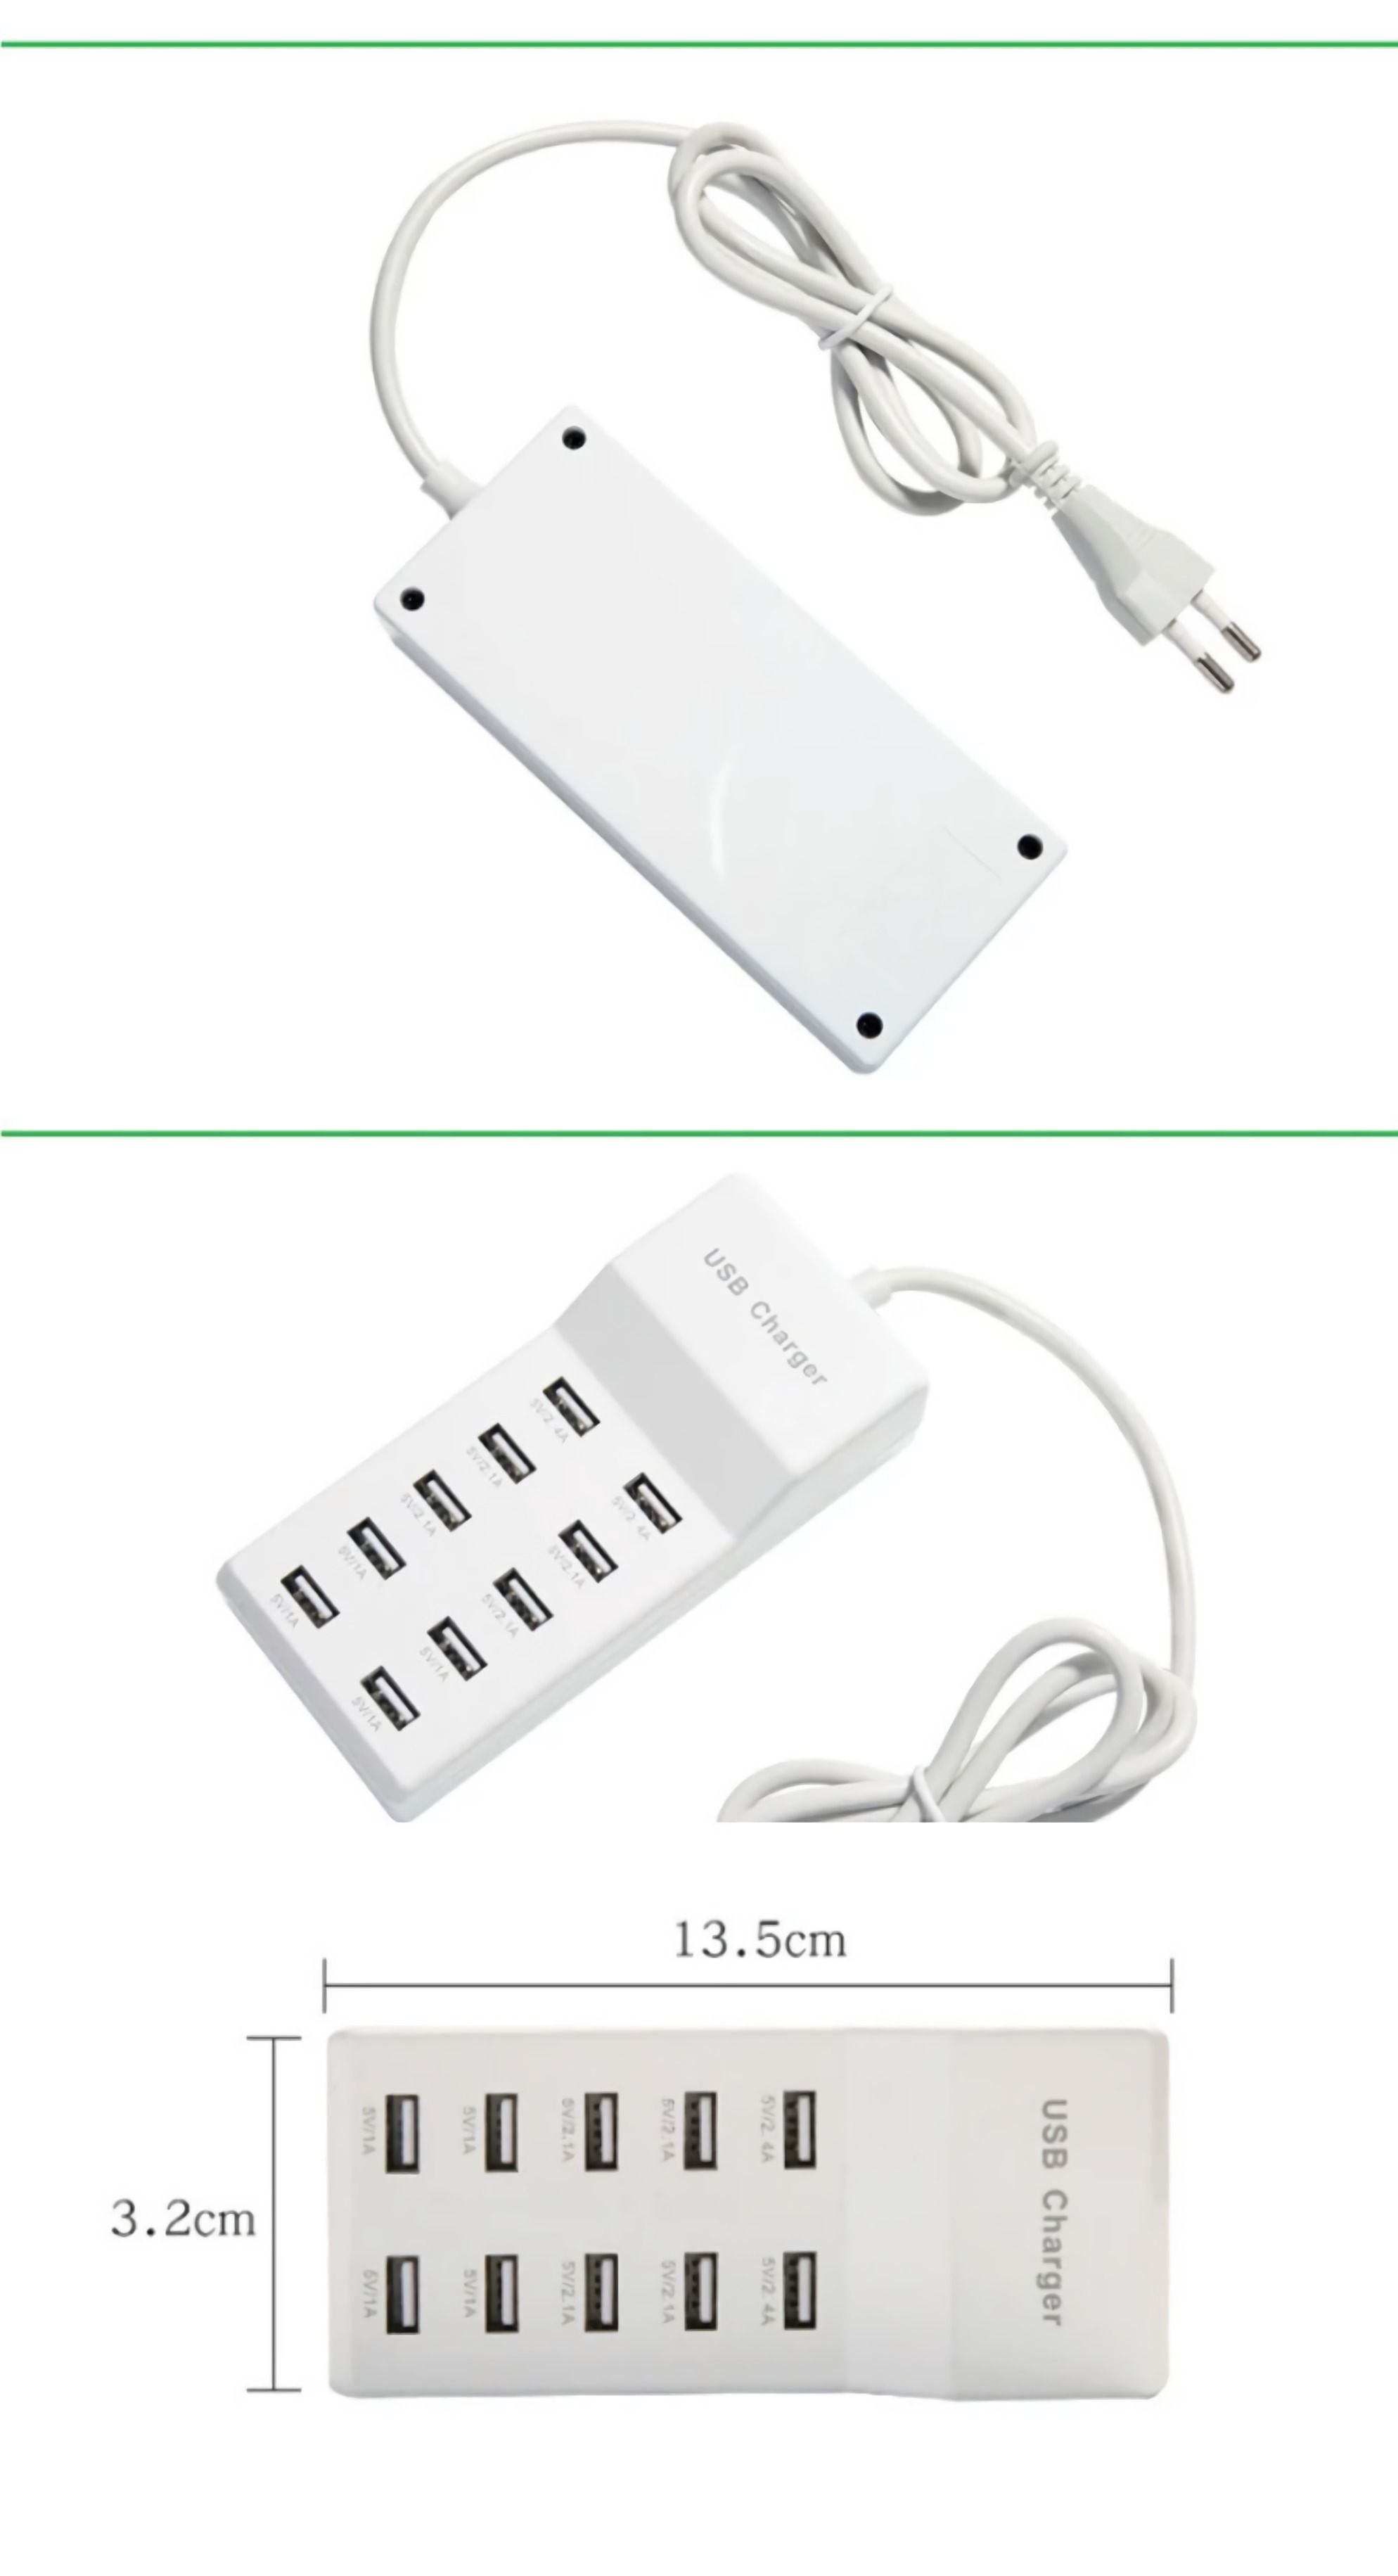 10-Port-USB-Tablet-Charger-EU-Plug-5V-24A-Wall-Charger-Hubs-for-Samsung-Huawei-Tablets-Phone-Pad-Fas-1658734